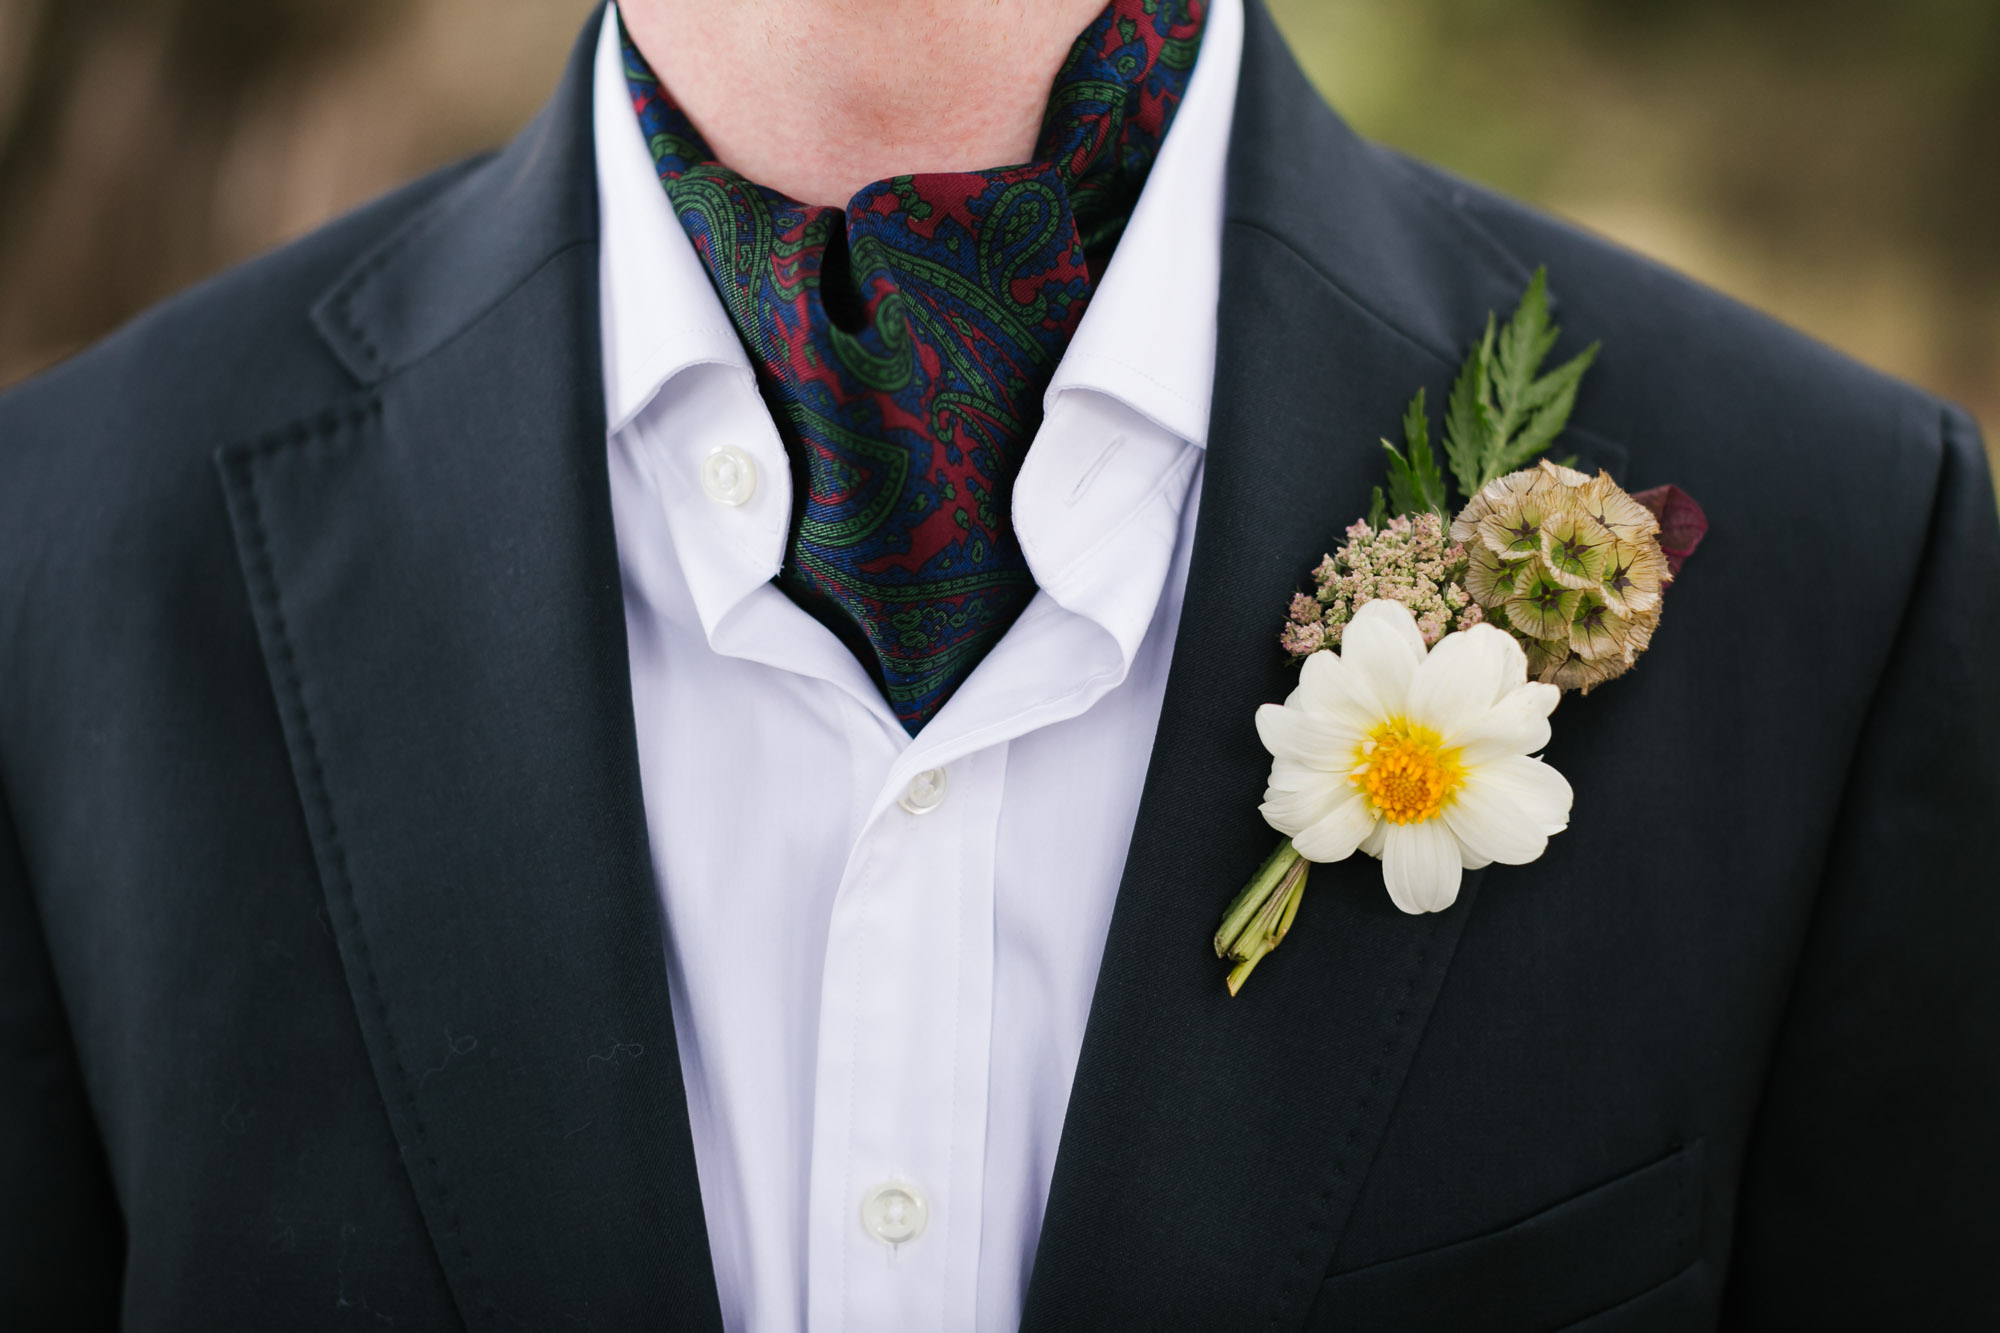 Groom's wedding suit with paisley ascot and boutonniere